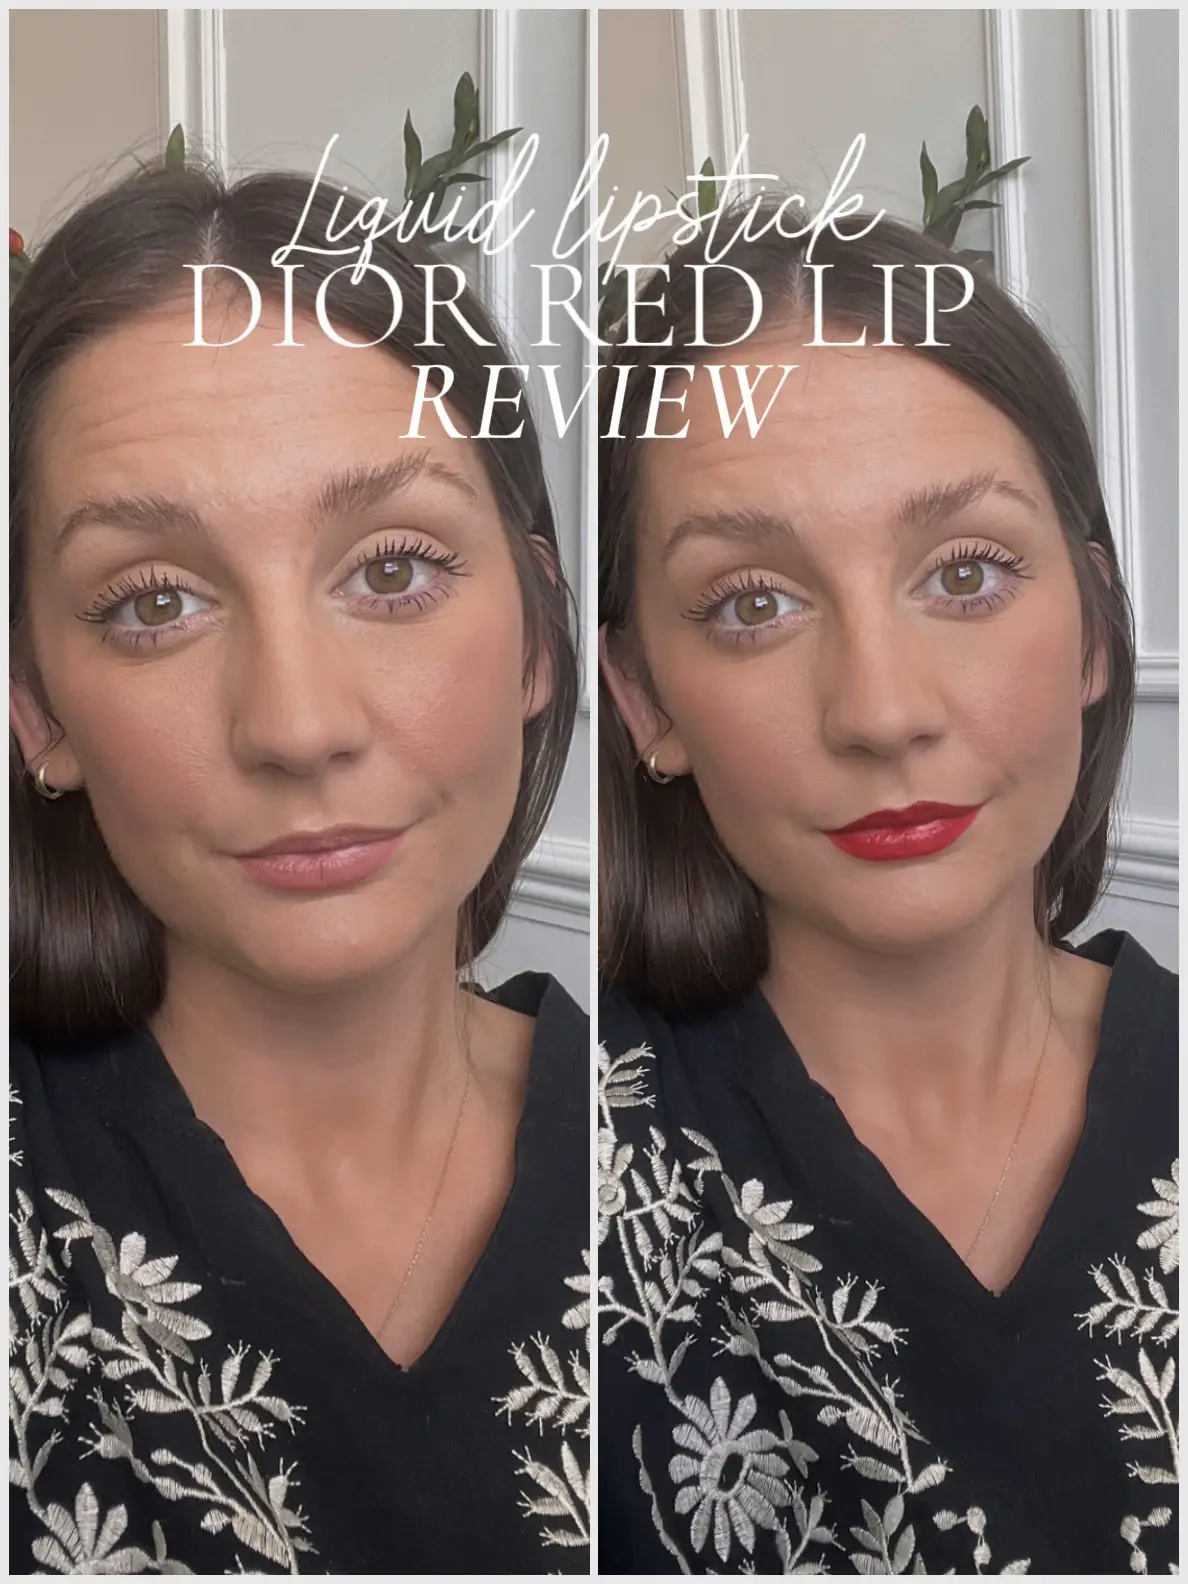 🤍 DIOR MATTE LIP REVIEW, Gallery posted by Mel June Rose